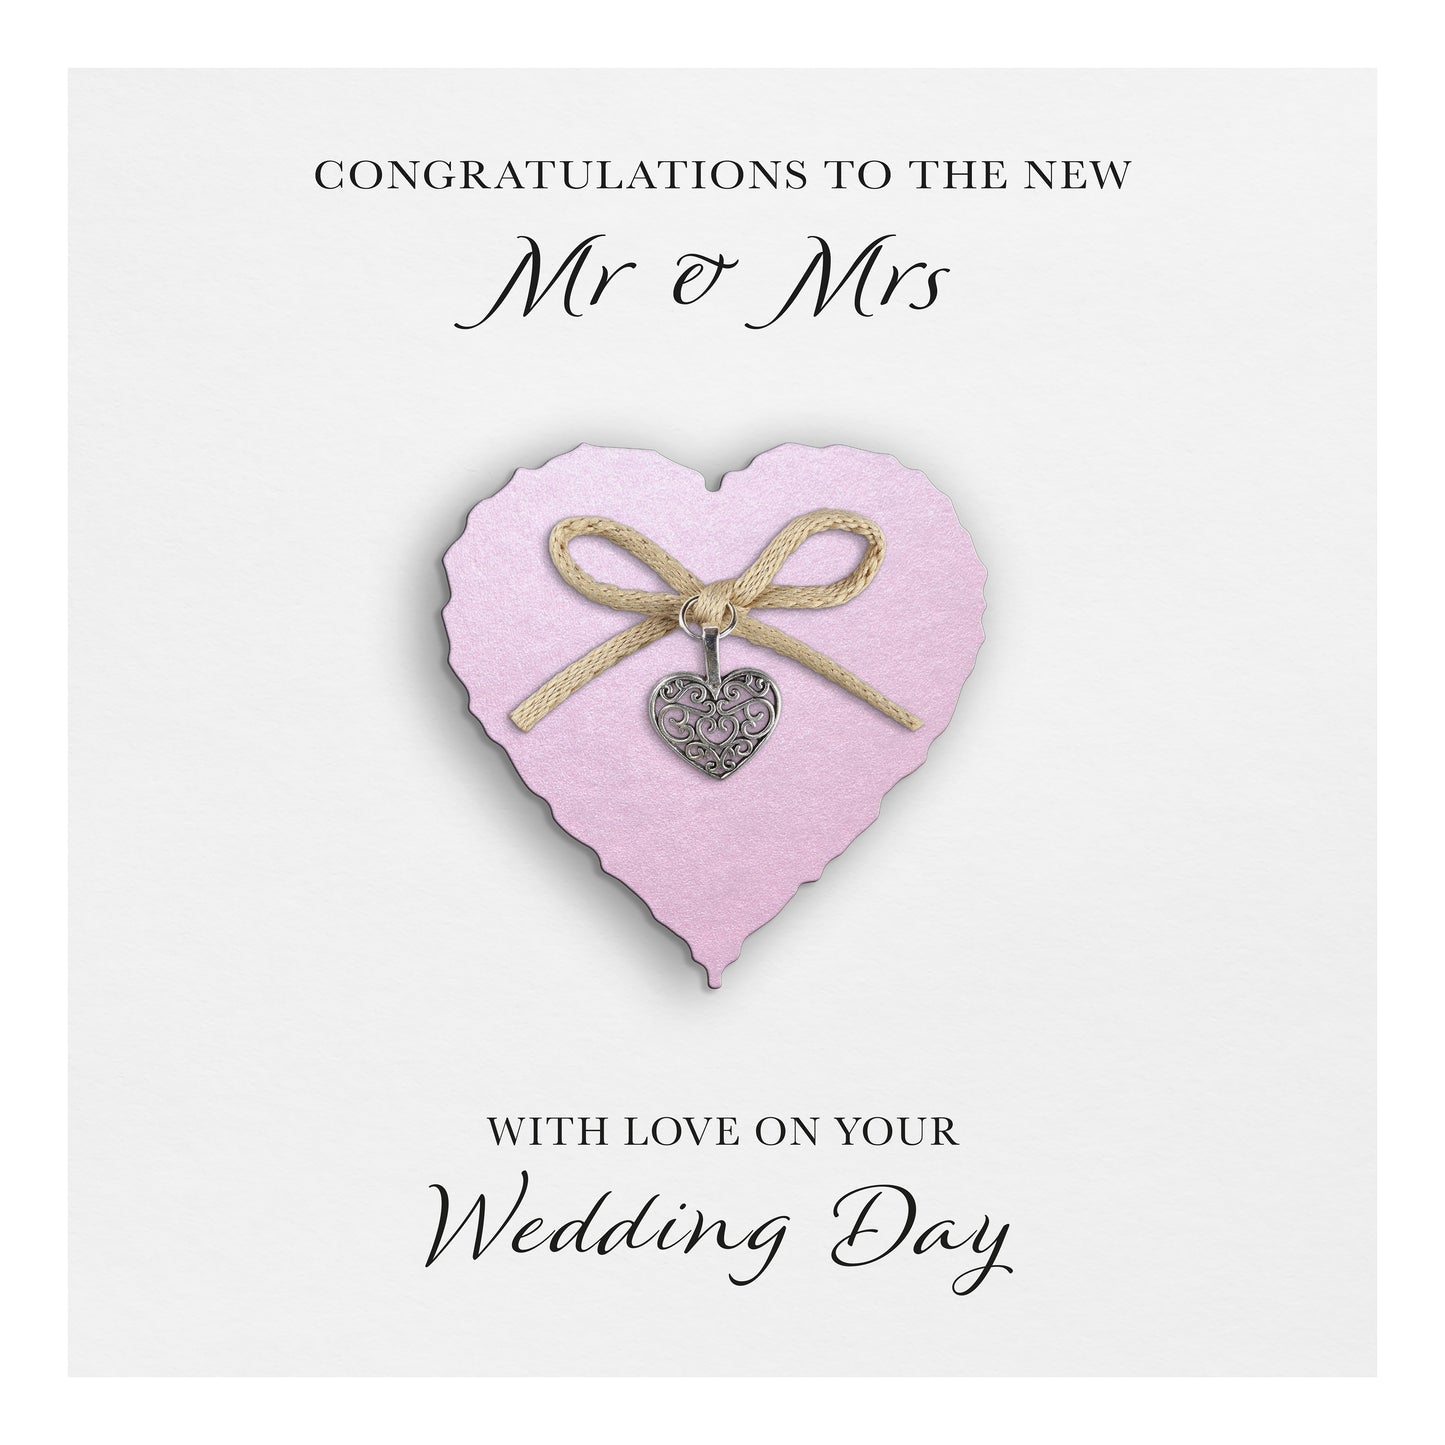 Wedding Day Card "Heart Charm & Bow" (White Cardstock)